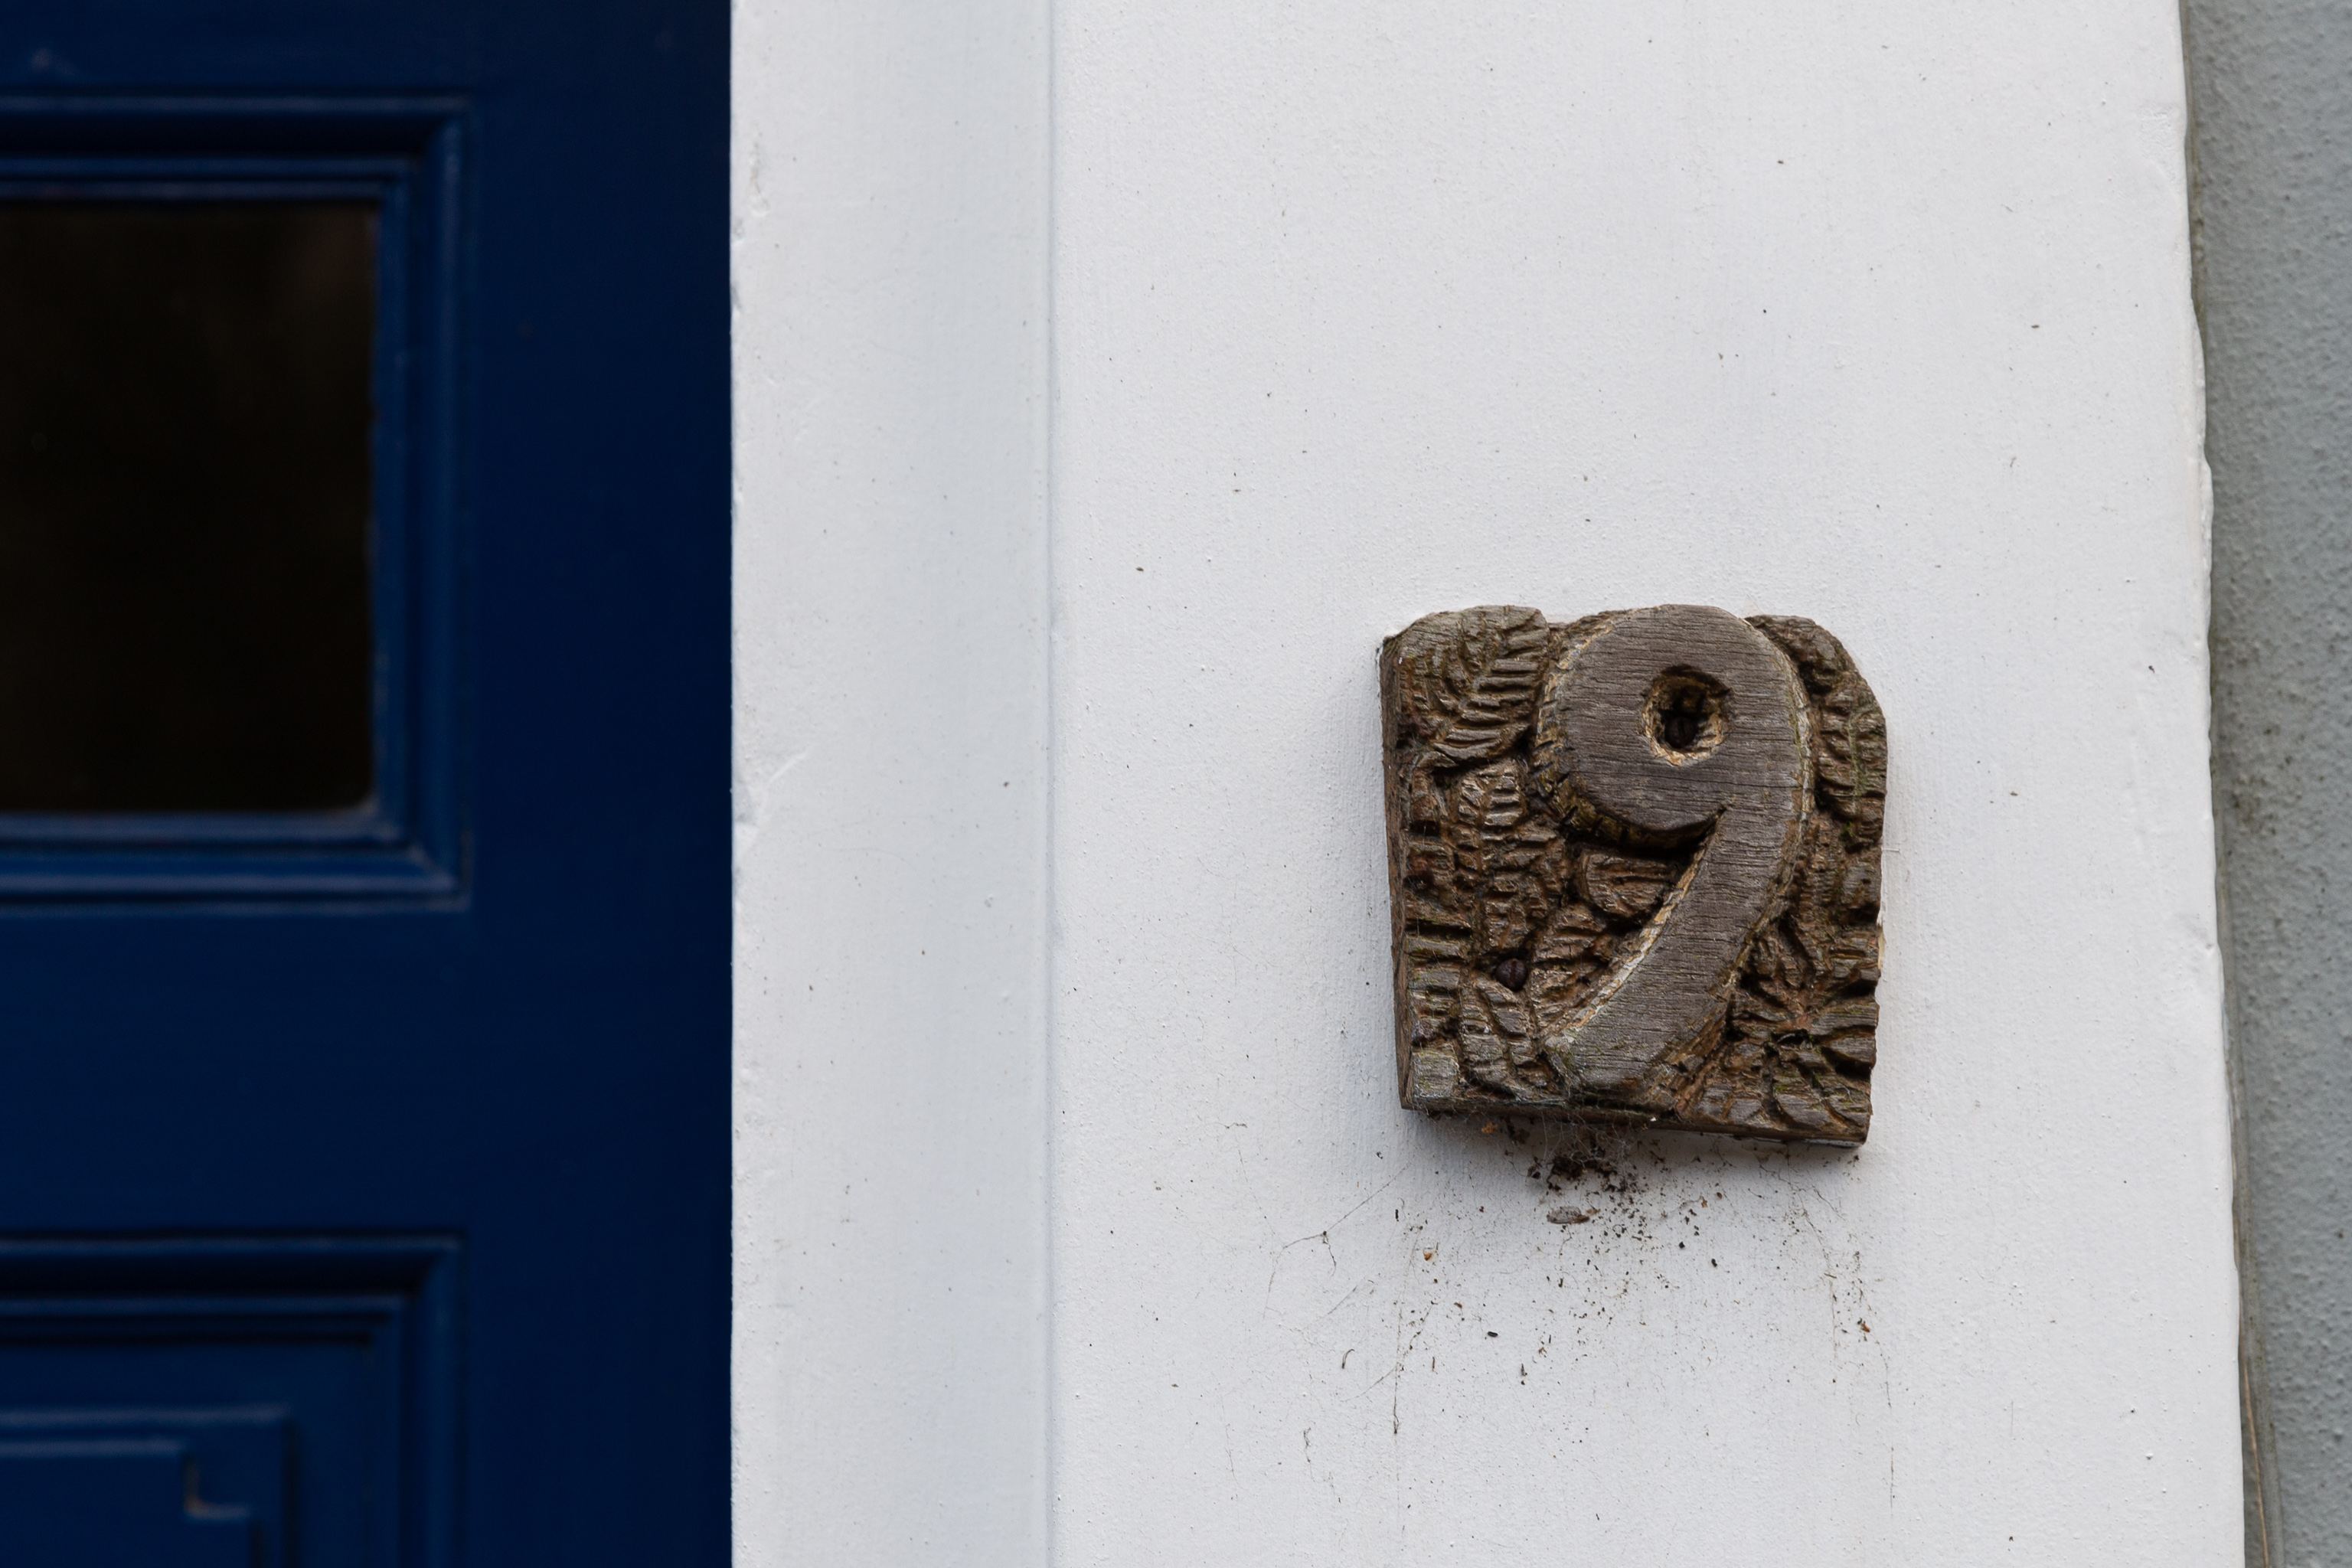 Nine
Not the front door we were looking for, but I like the hand-carved digit at 9 Cornwallis Crescent.

I have snapped this section of Cornwallis Cresc...